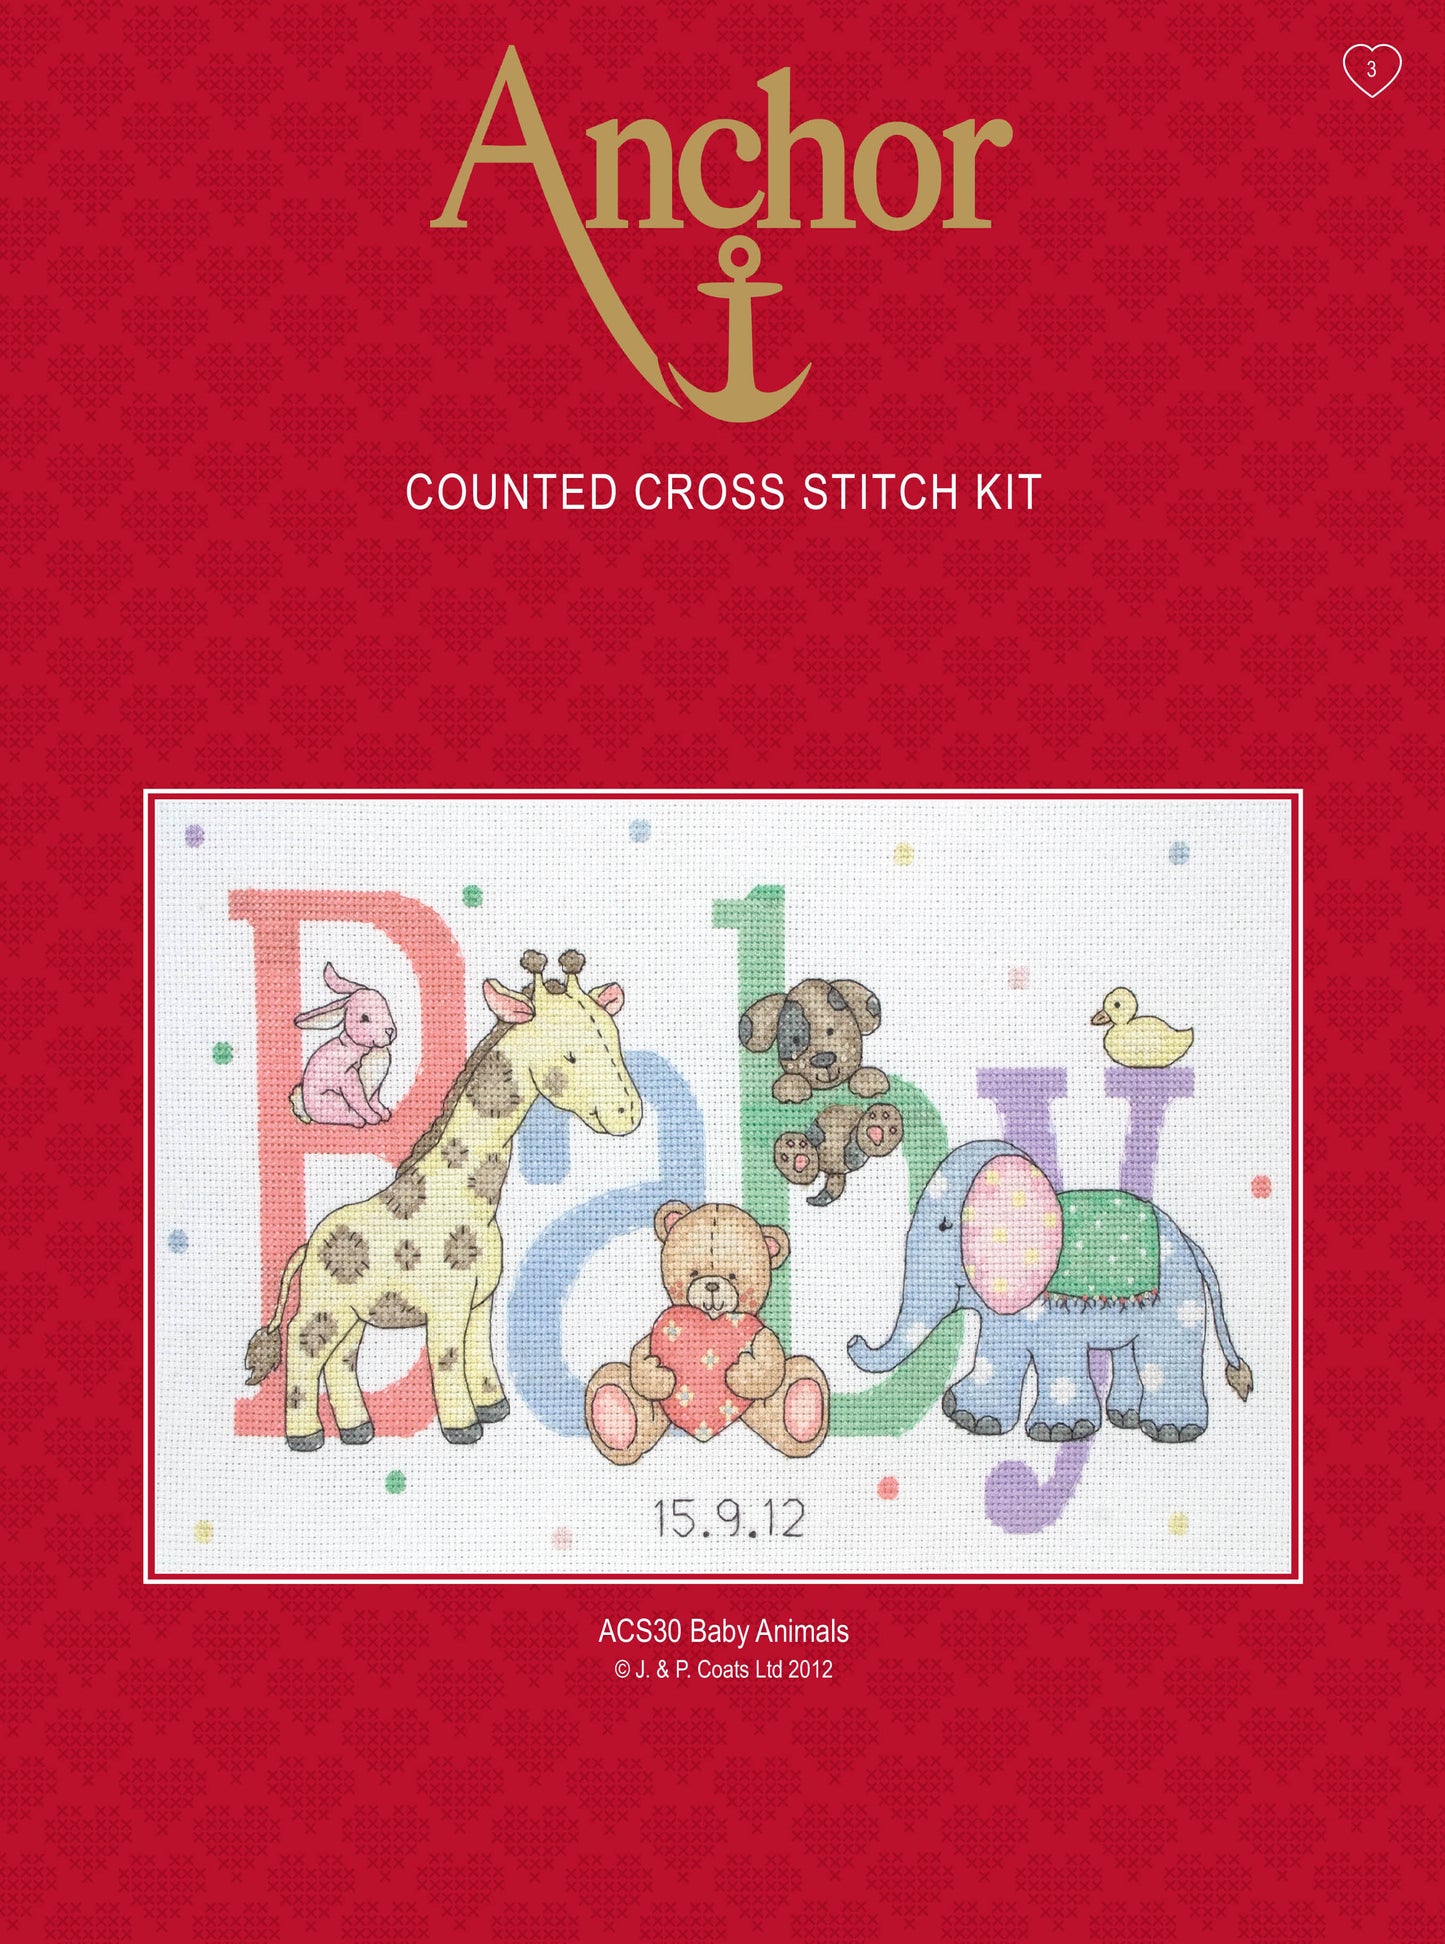 Anchor Counted Cross Stitch Kit Birth Record Baby Animals